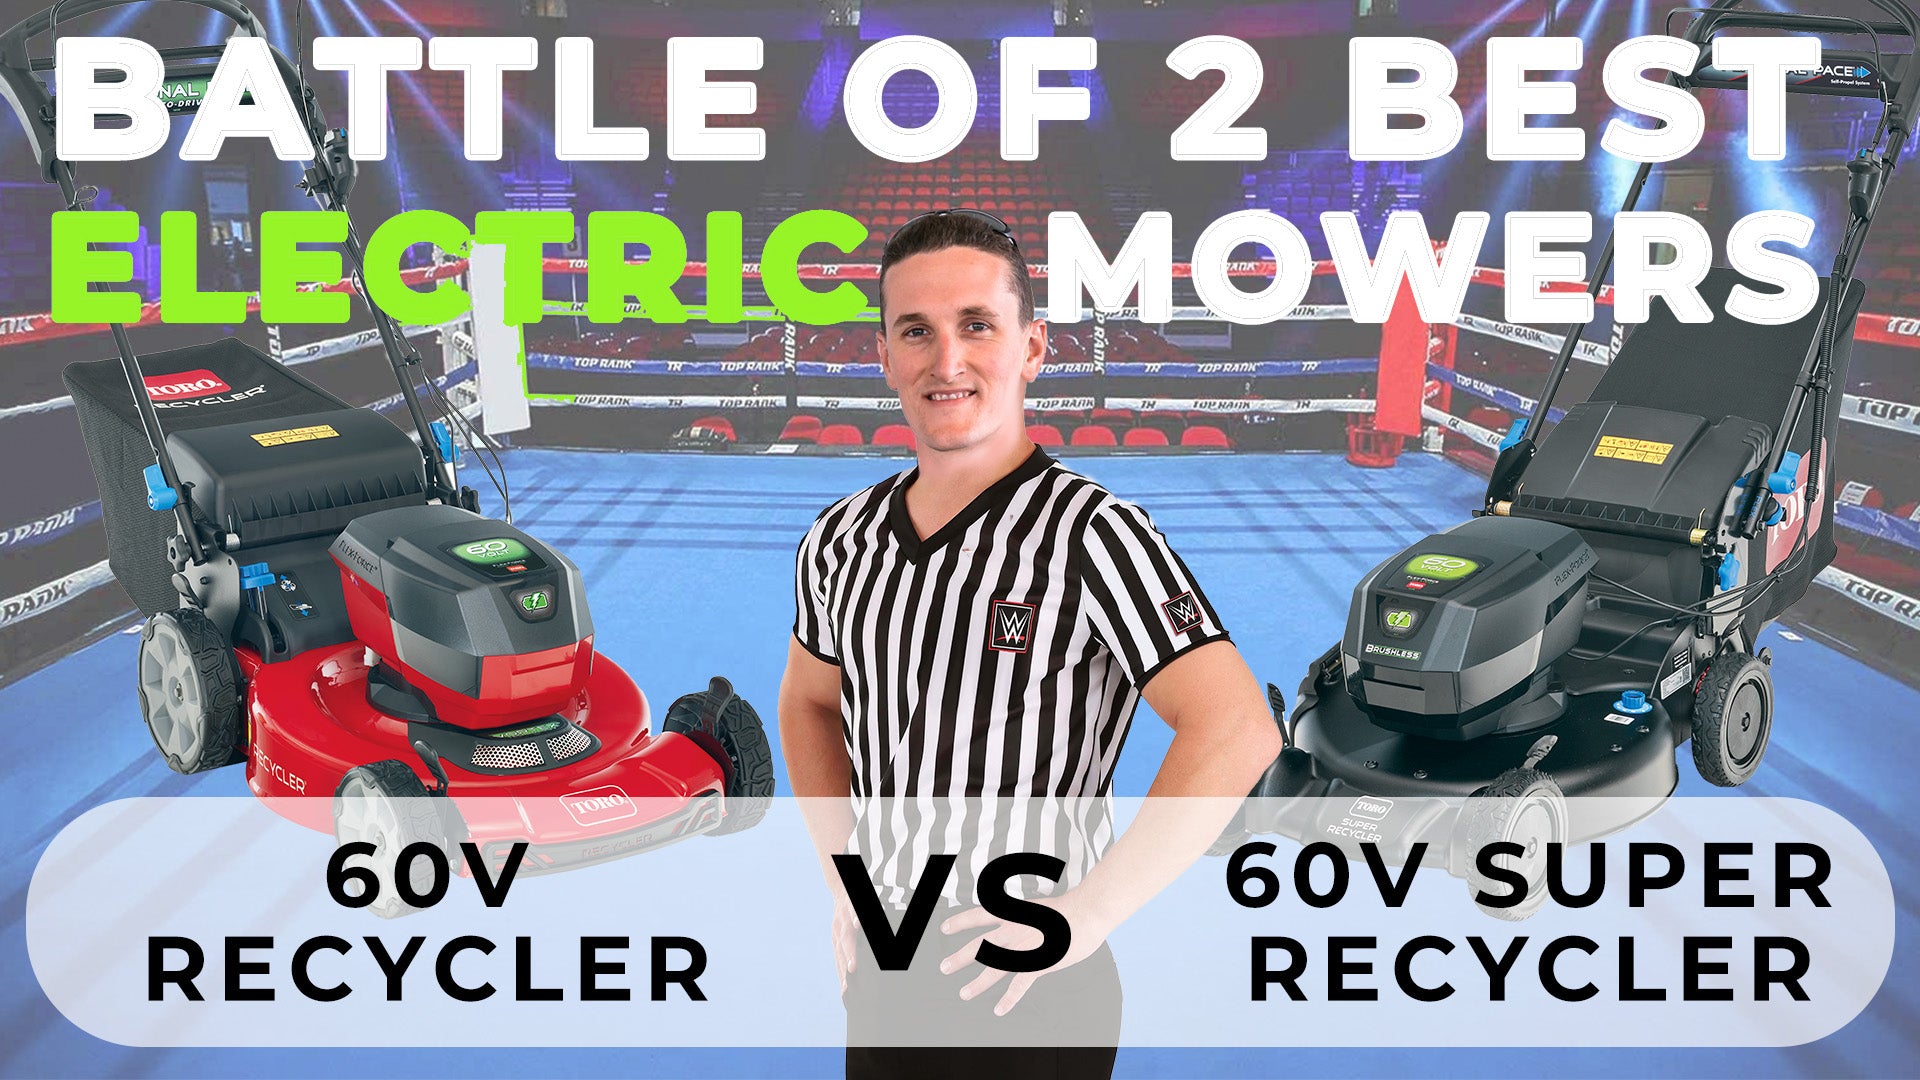 Comparing 2 BEST ELECTRIC Walk Behind Mowers in 5 Minutes - 60V Recycler vs Super Recycler